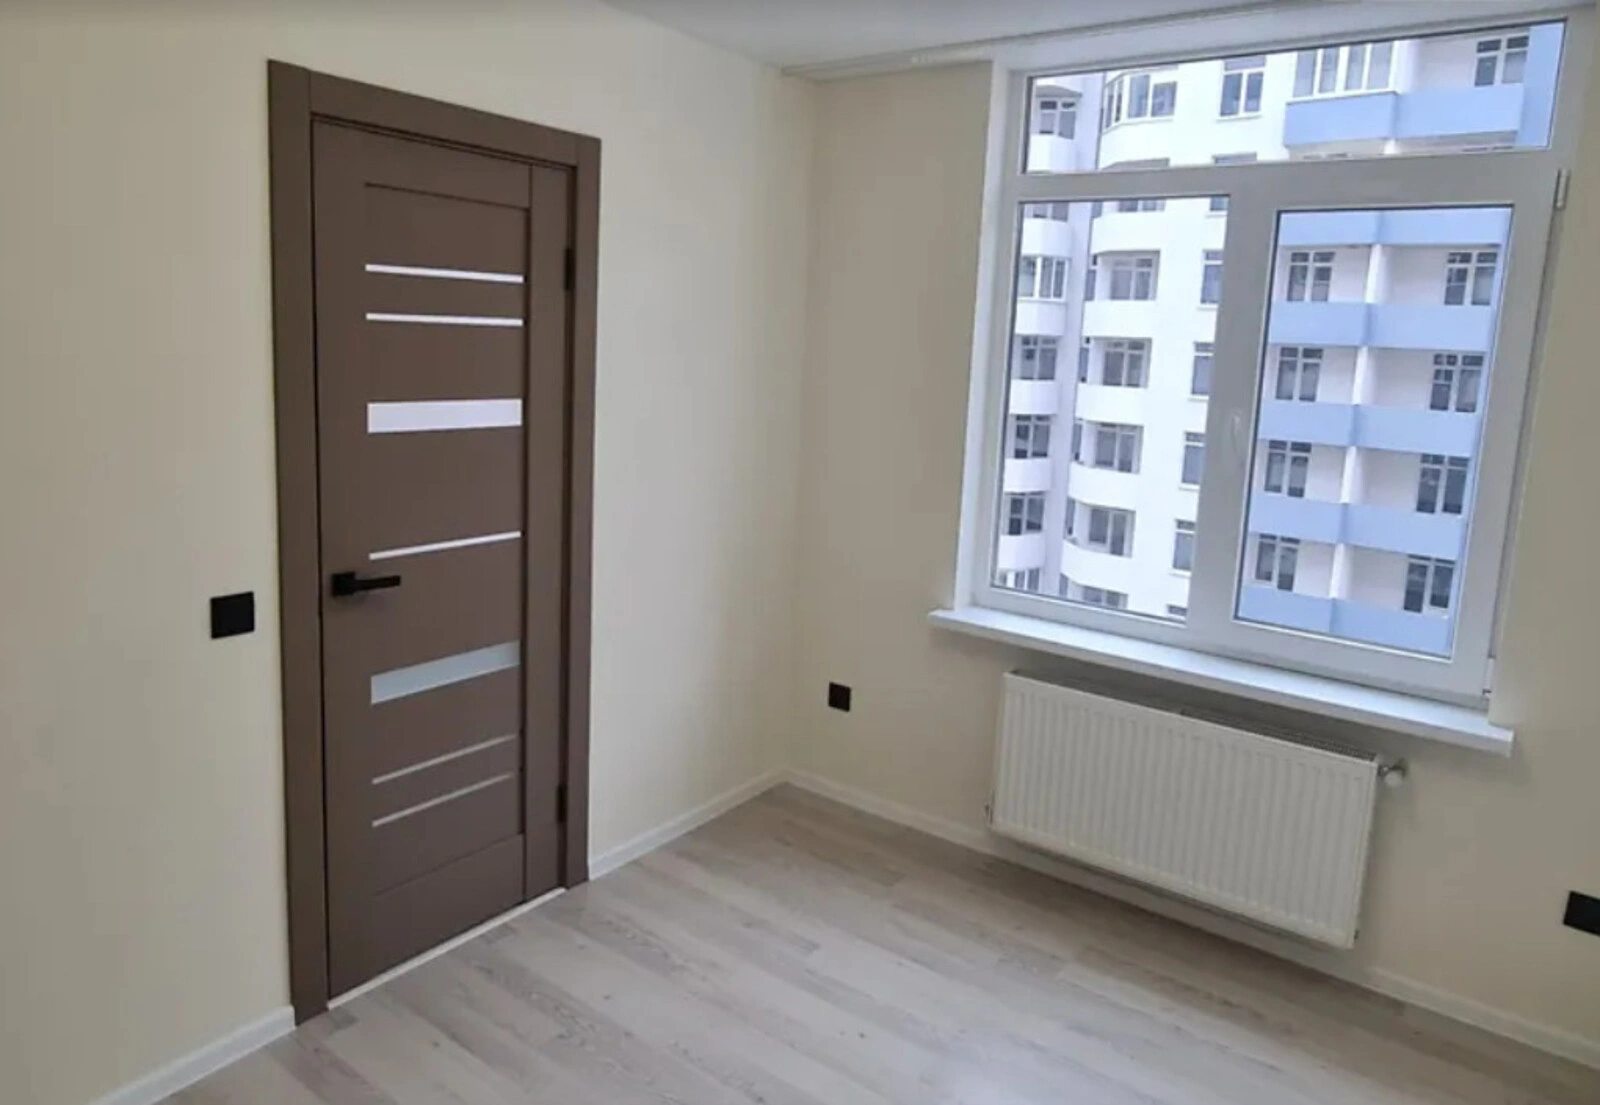 Apartments for sale. 3 rooms, 60 m², 7th floor/11 floors. Bam, Ternopil. 